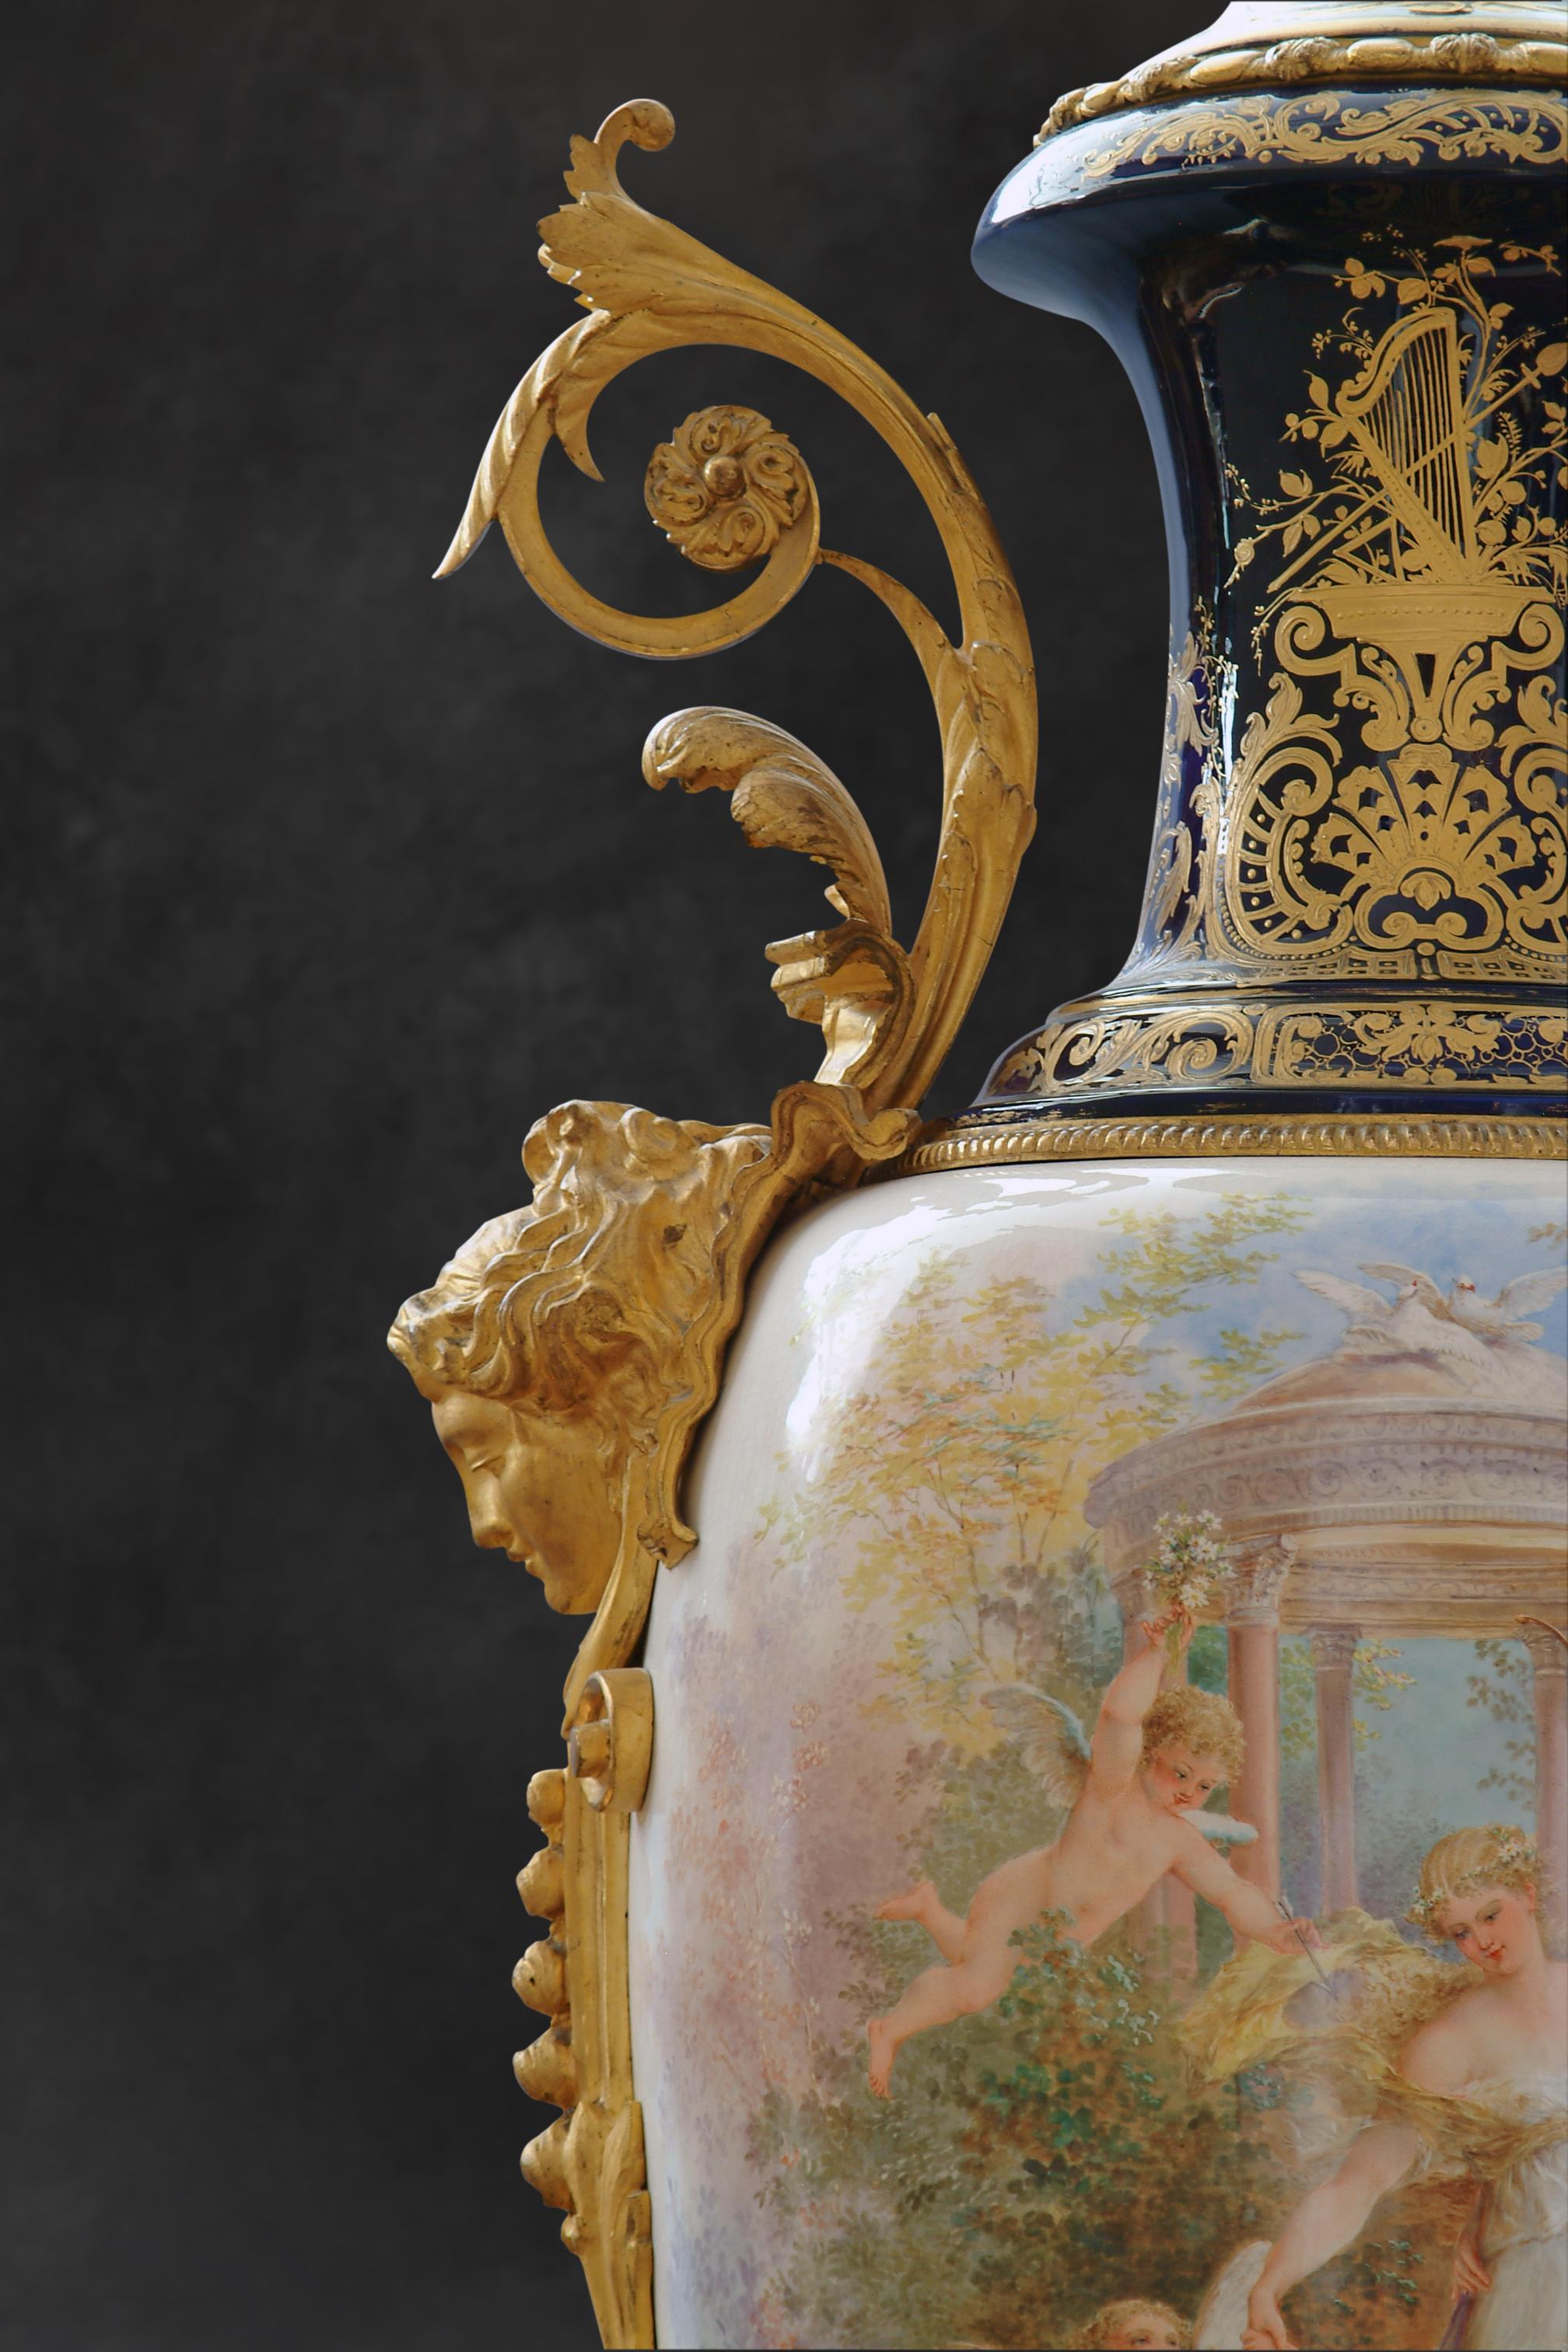 Monumental 19th century French Sevres Porcelain Covered Urn - 66